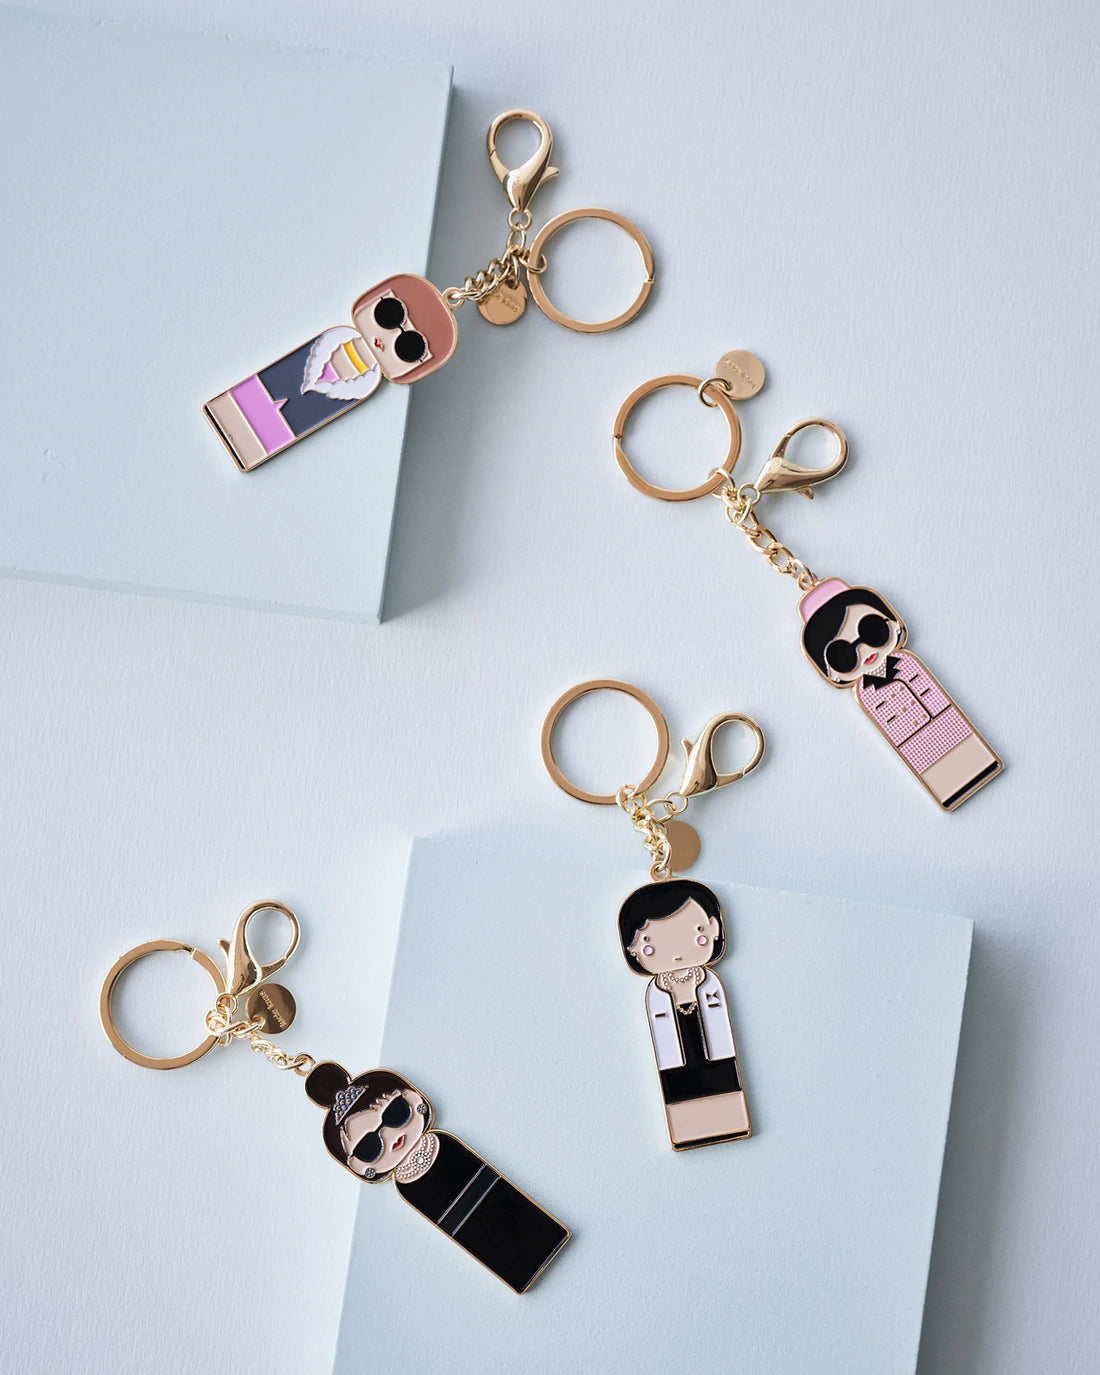 Sketch.inc Keychains by Lucie Kaas